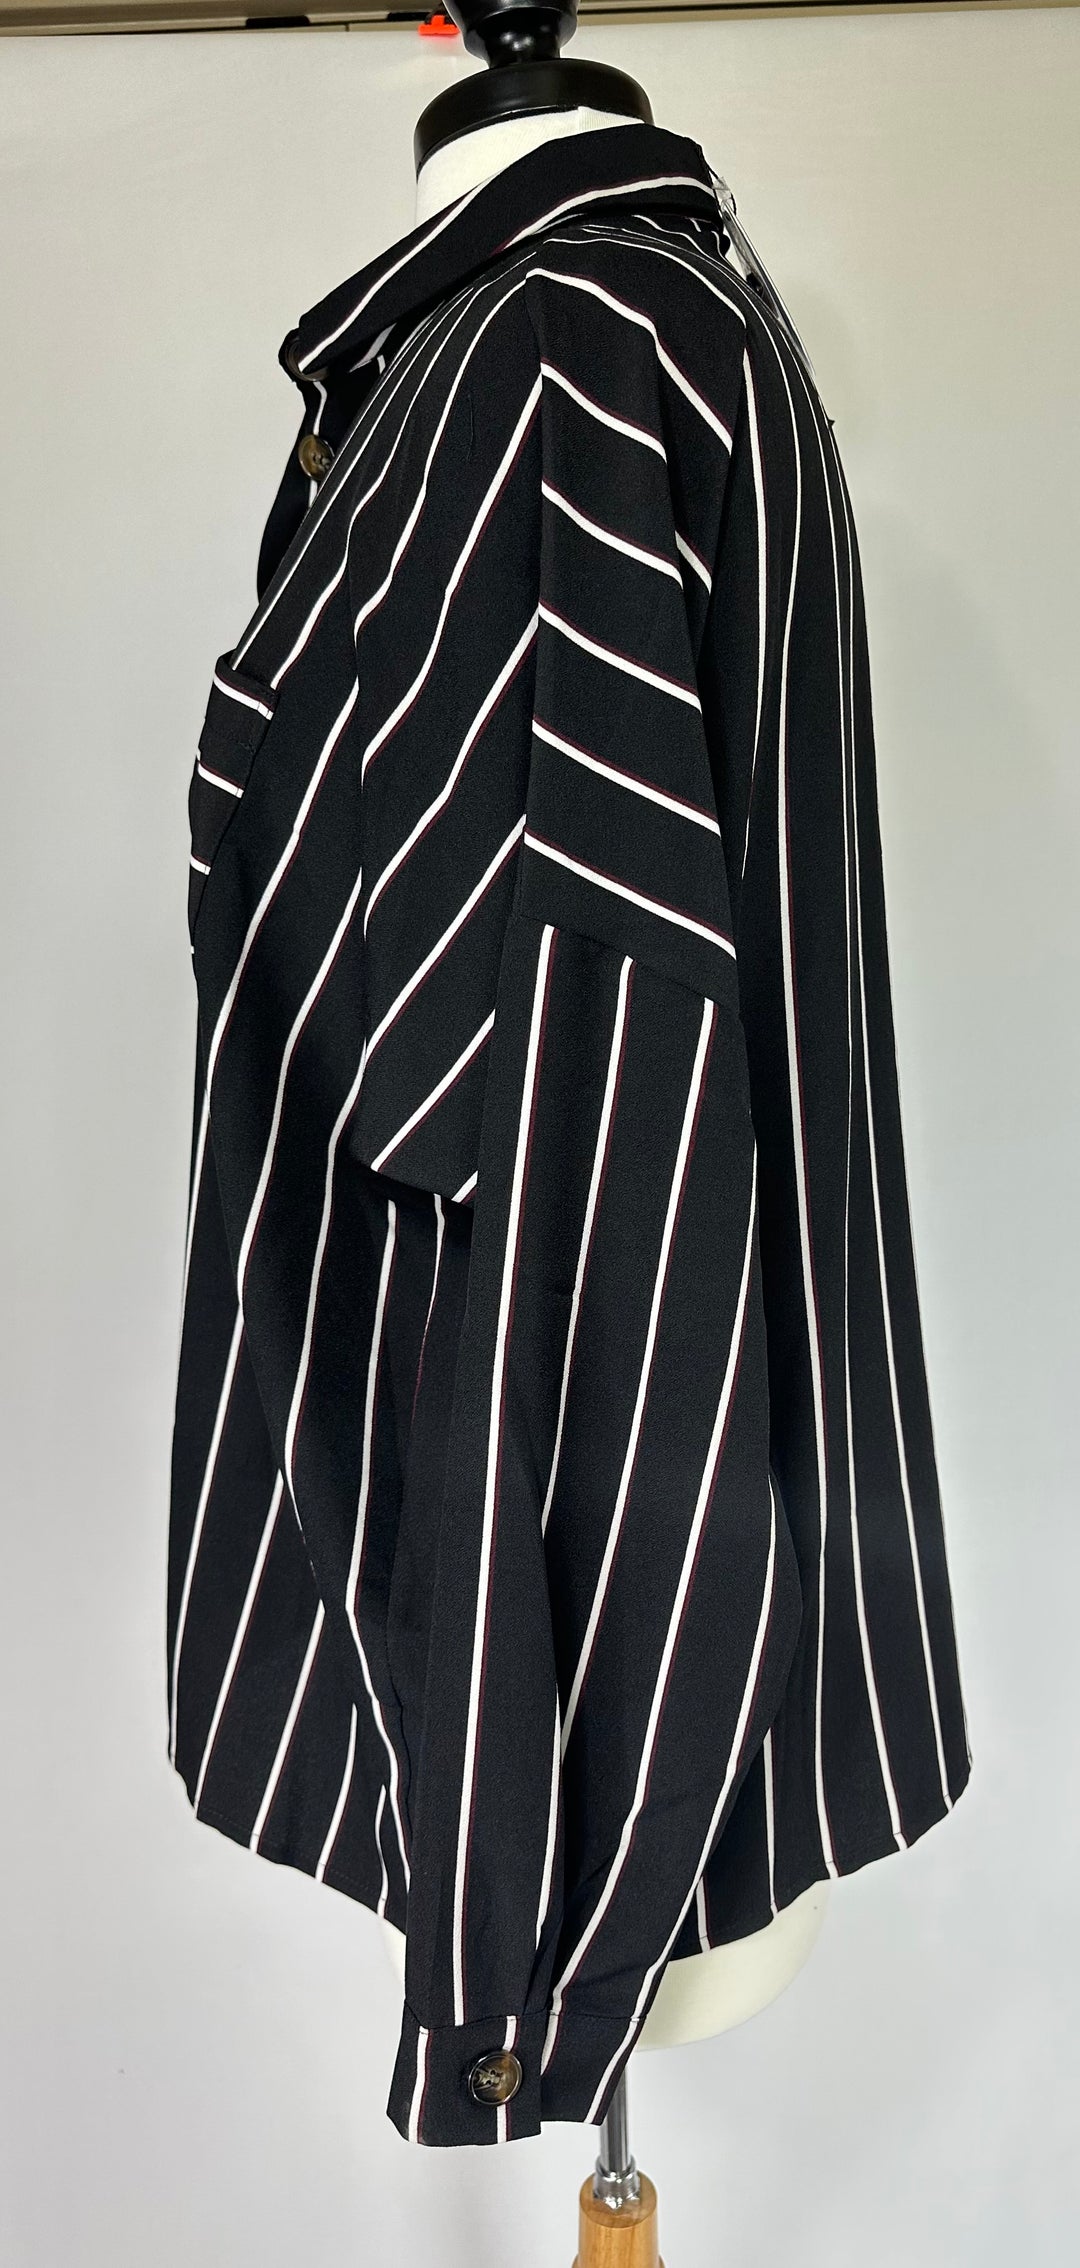 Uptown Black Pinstripe Button Up Blouse Top